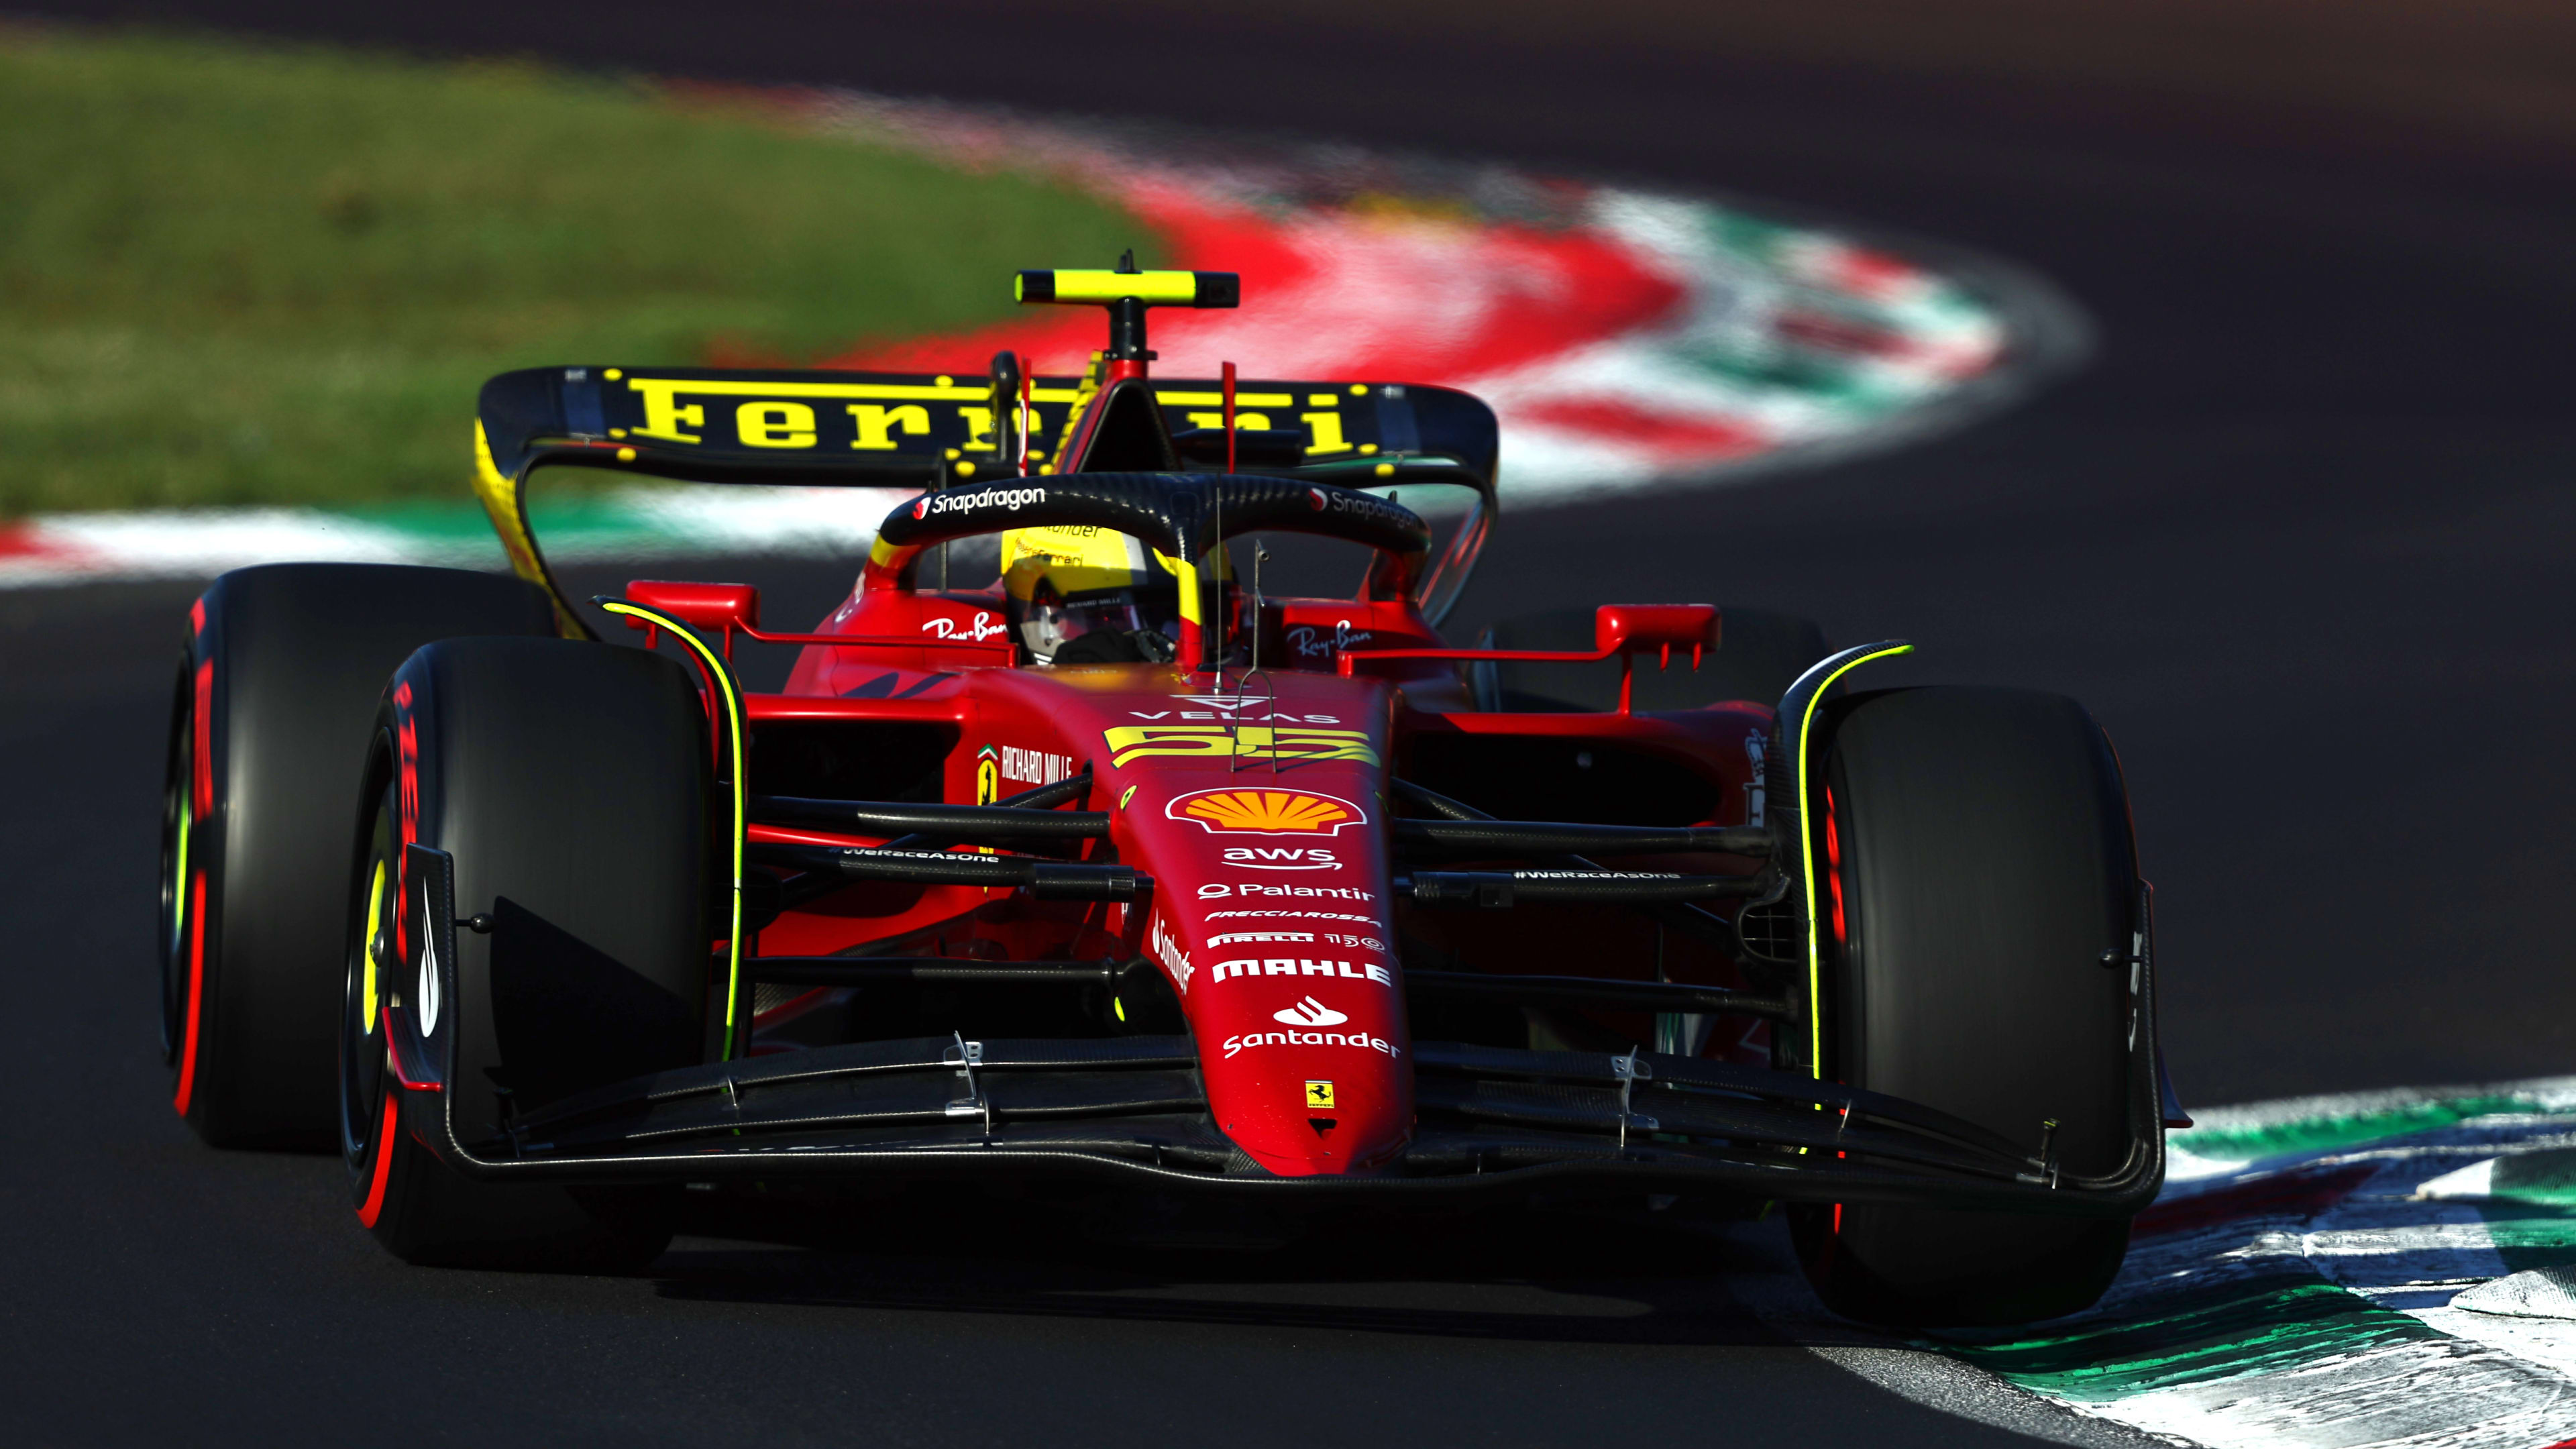 2022 Italian Grand Prix FP2 report and highlights Sainz leads Verstappen and Leclerc in second Monza practice session Formula 1®